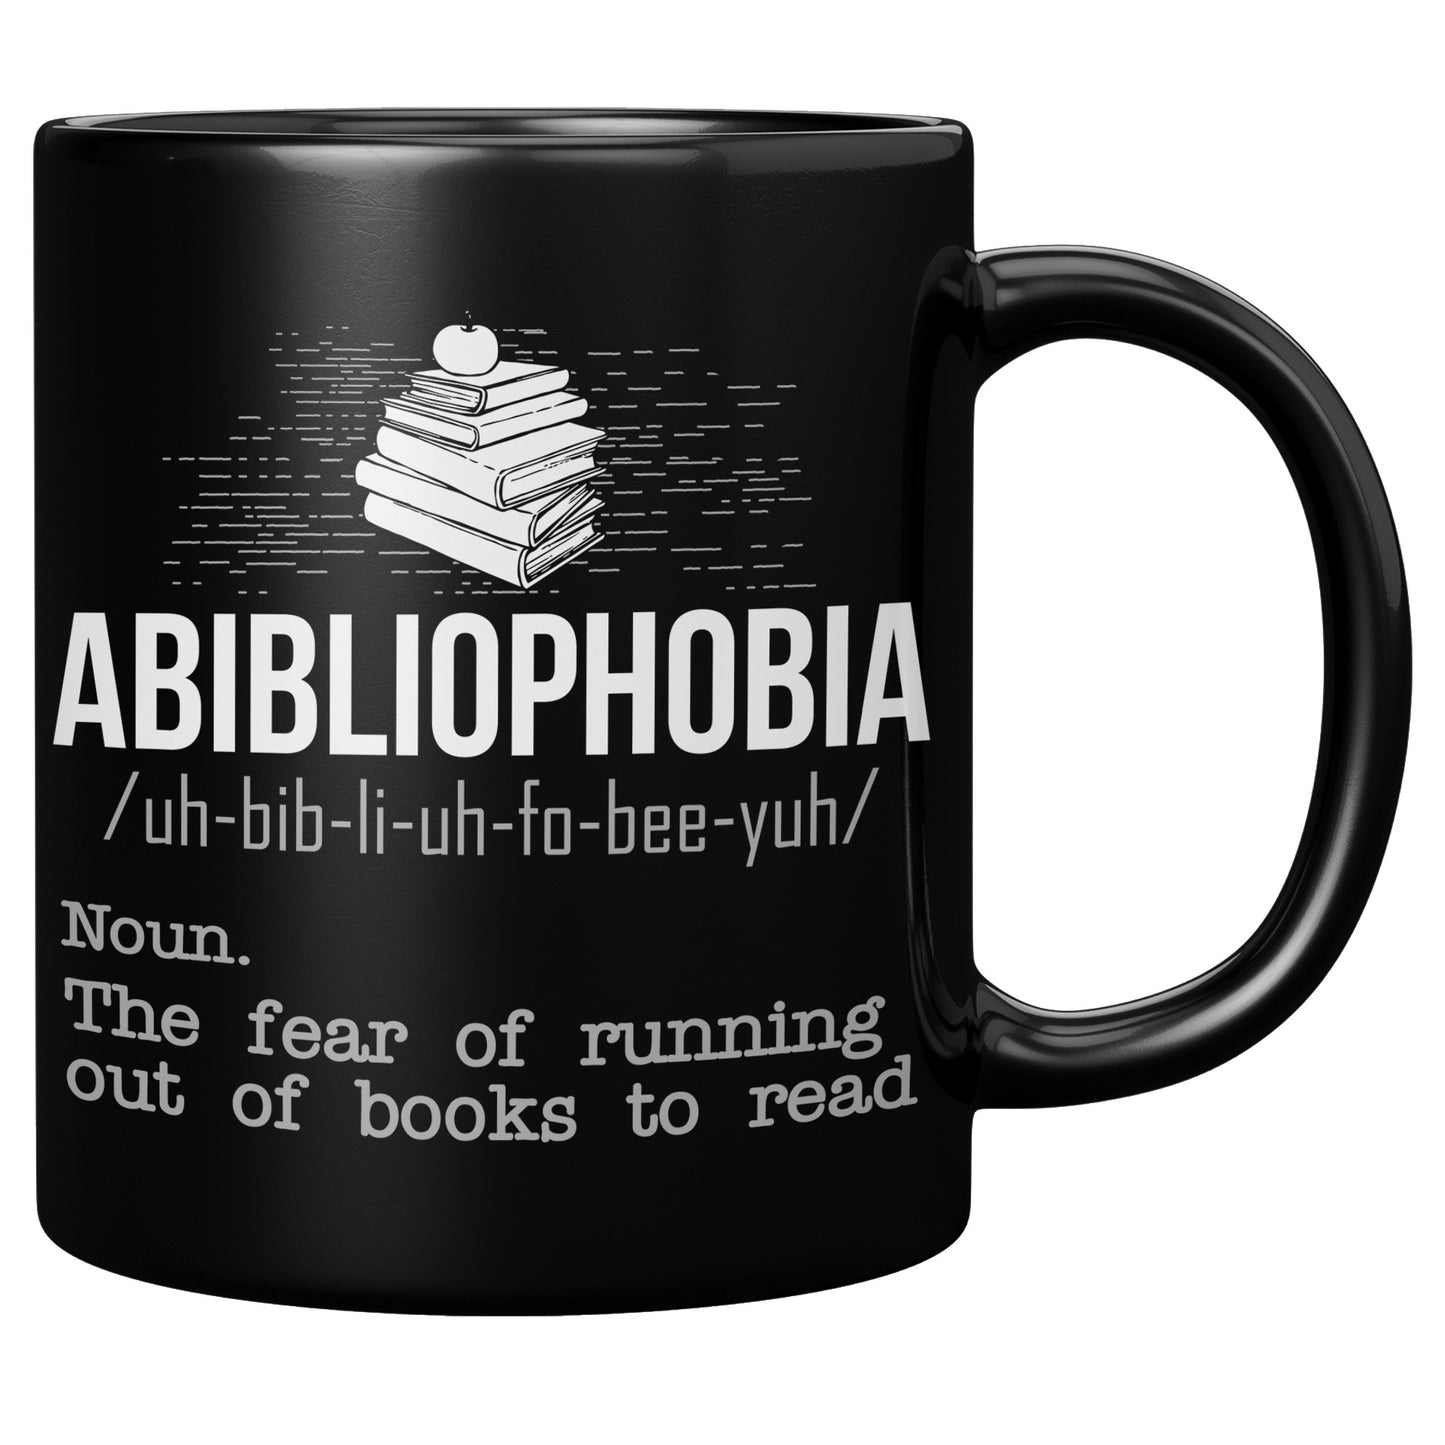 Abibliophobia. The Fear Of Running Out Of Books To Read | Mug